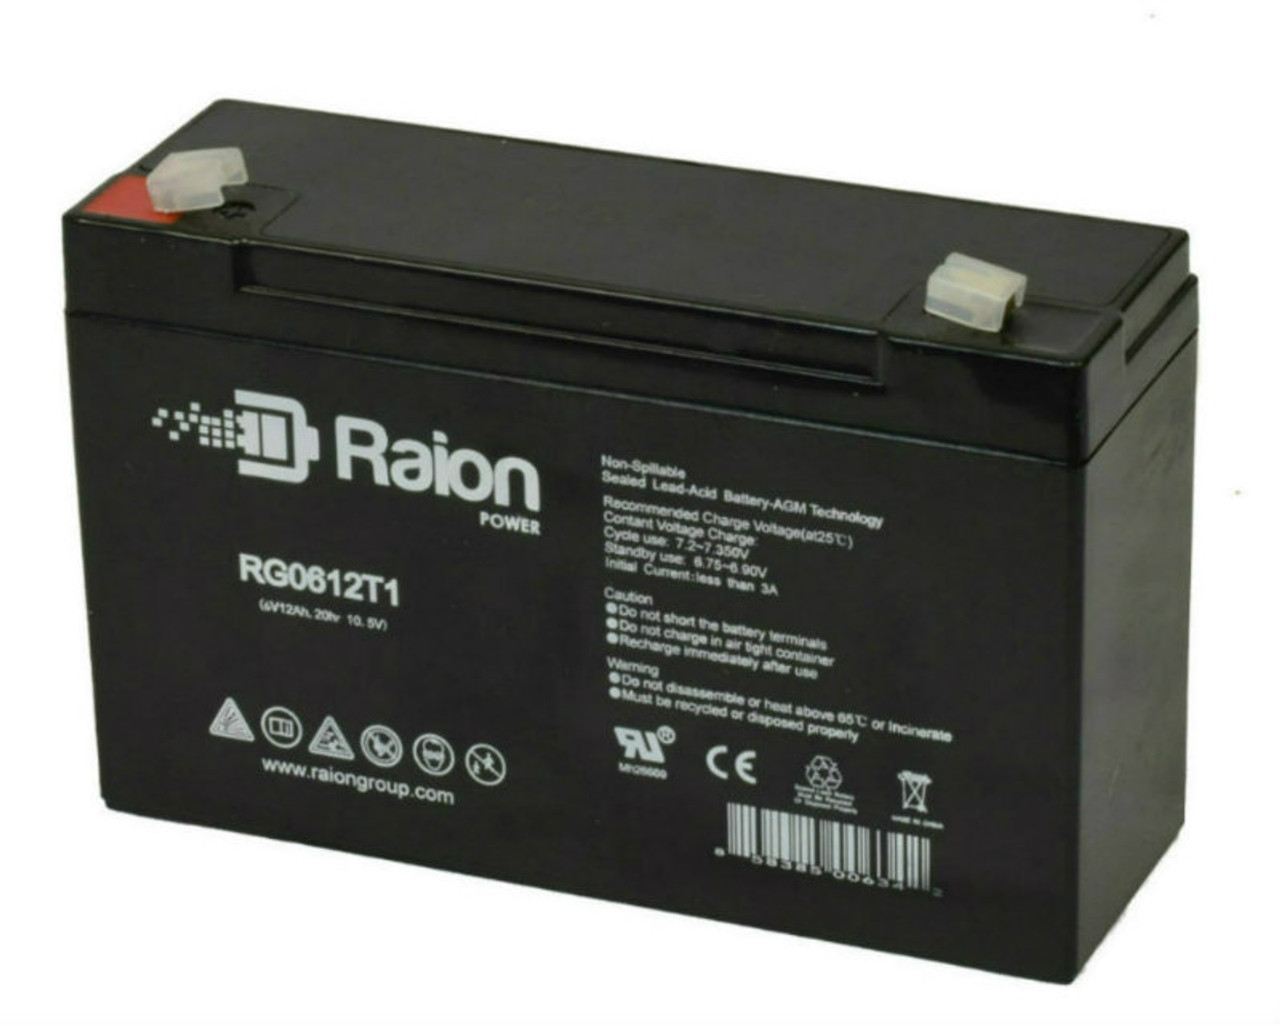 Raion Power RG06120T1 Replacement 6V 12Ah Emergency Light Battery for Siltron PE680